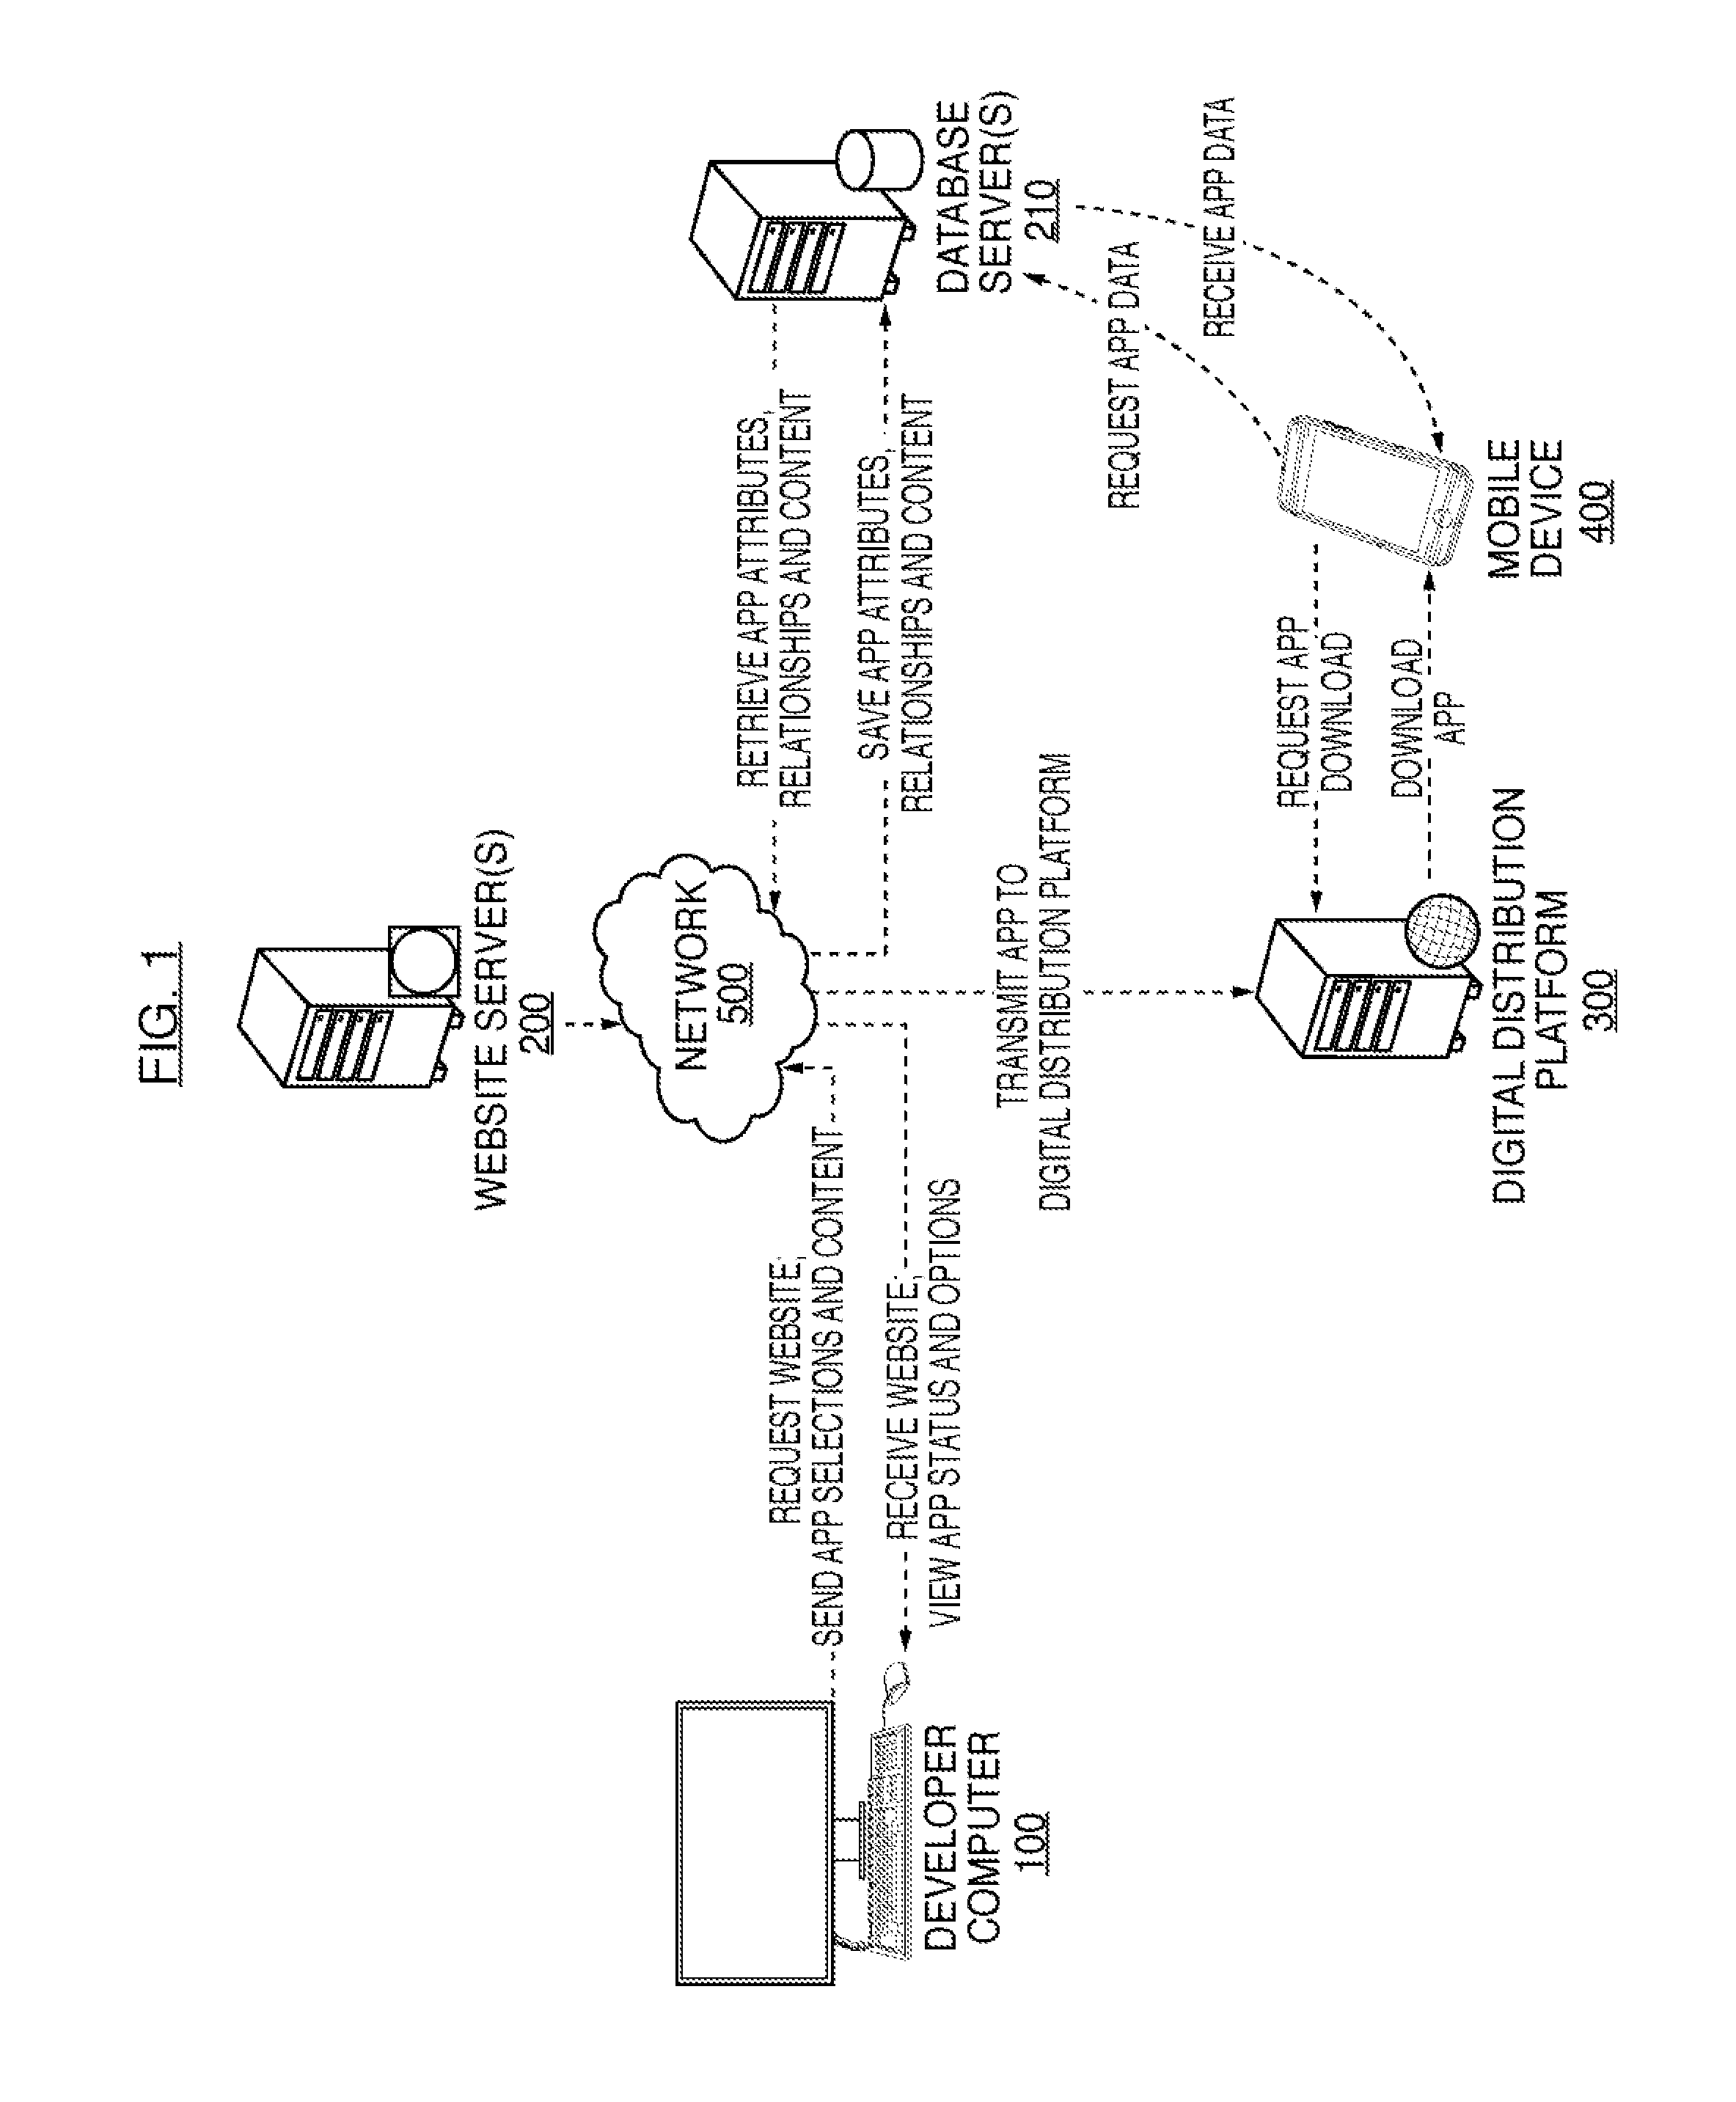 Systems and methods for a specialized application development and deployment platform